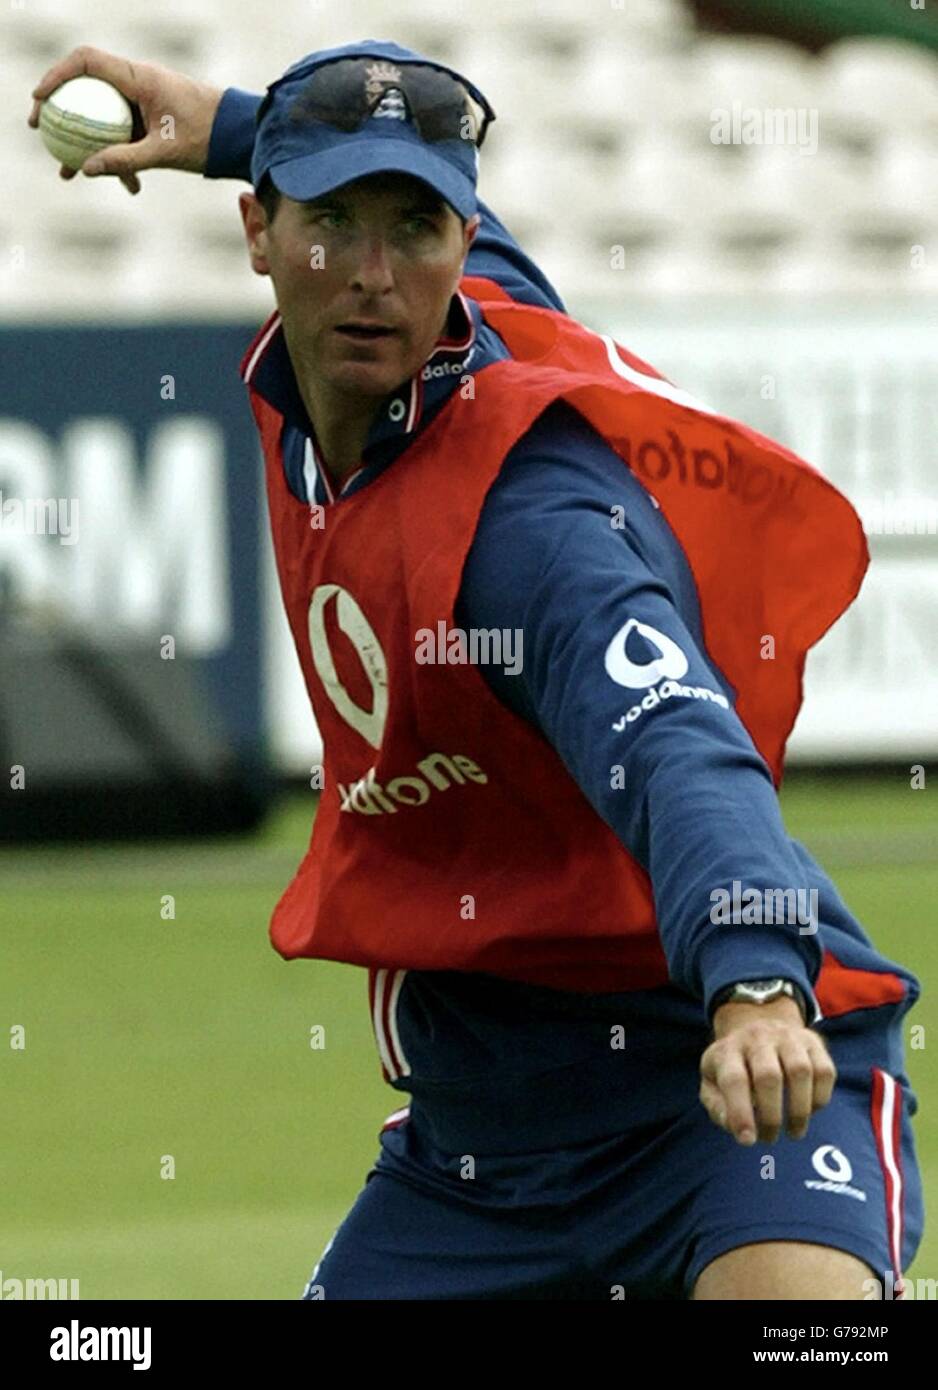 England's captain Michael Vaughan throws the ball during net practice at Old Trafford, Manchester. South Africa will face England in the NatWest Series at Old Trafford. Stock Photo